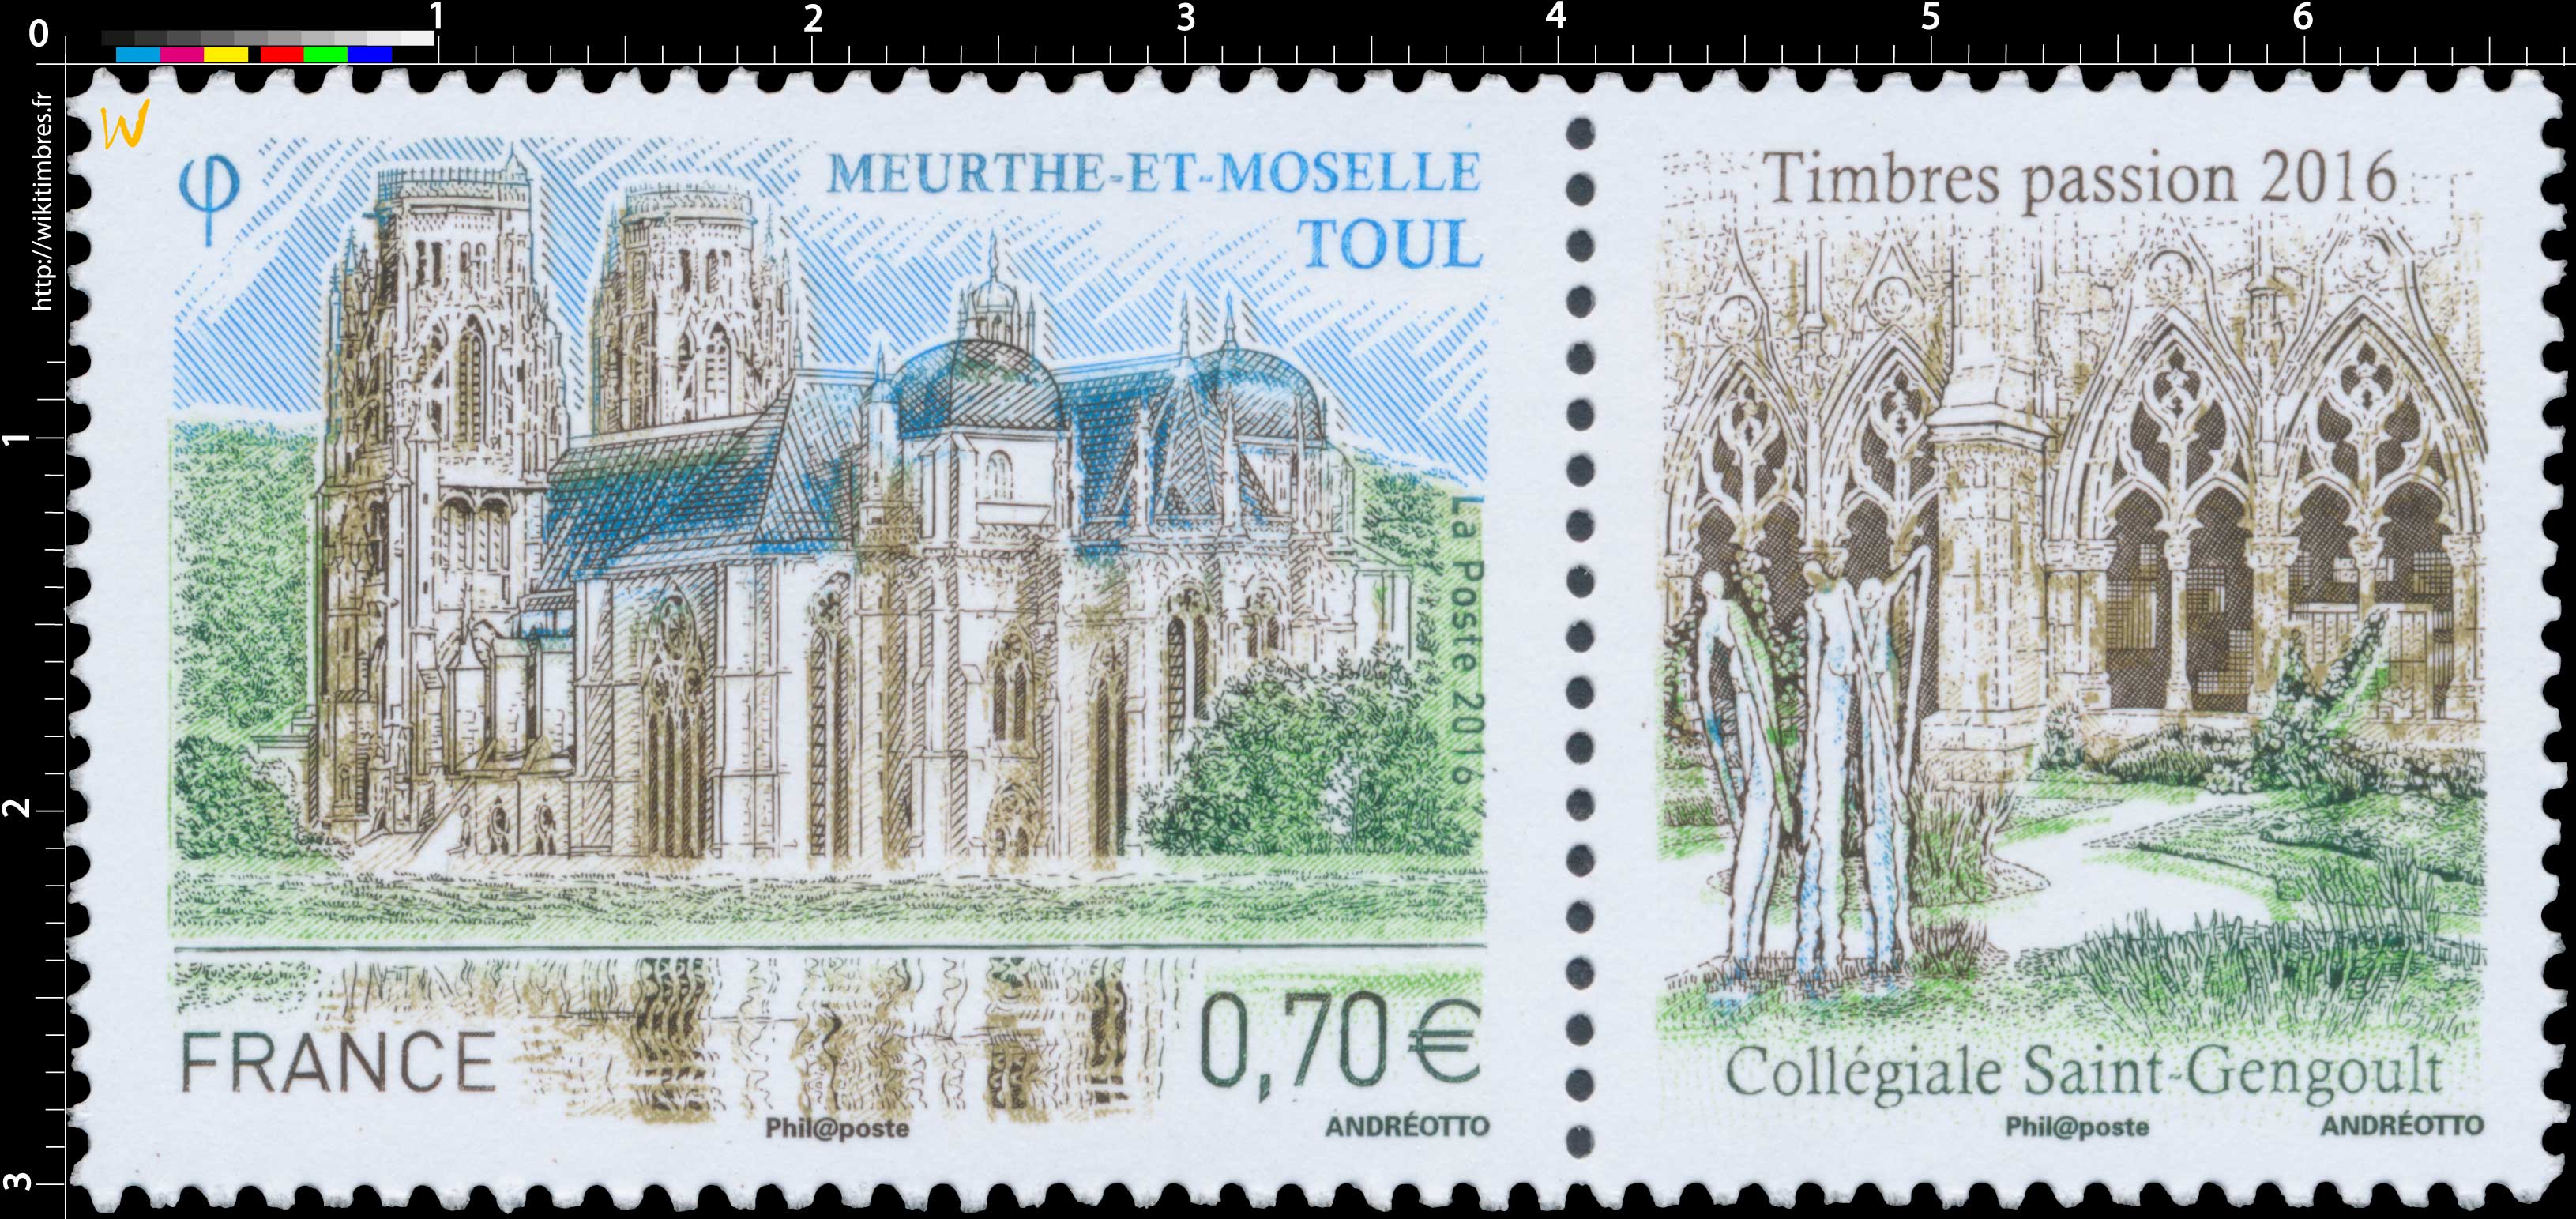 MEURTHE-ET-MOSELLE TOUL Timbres passion 2016